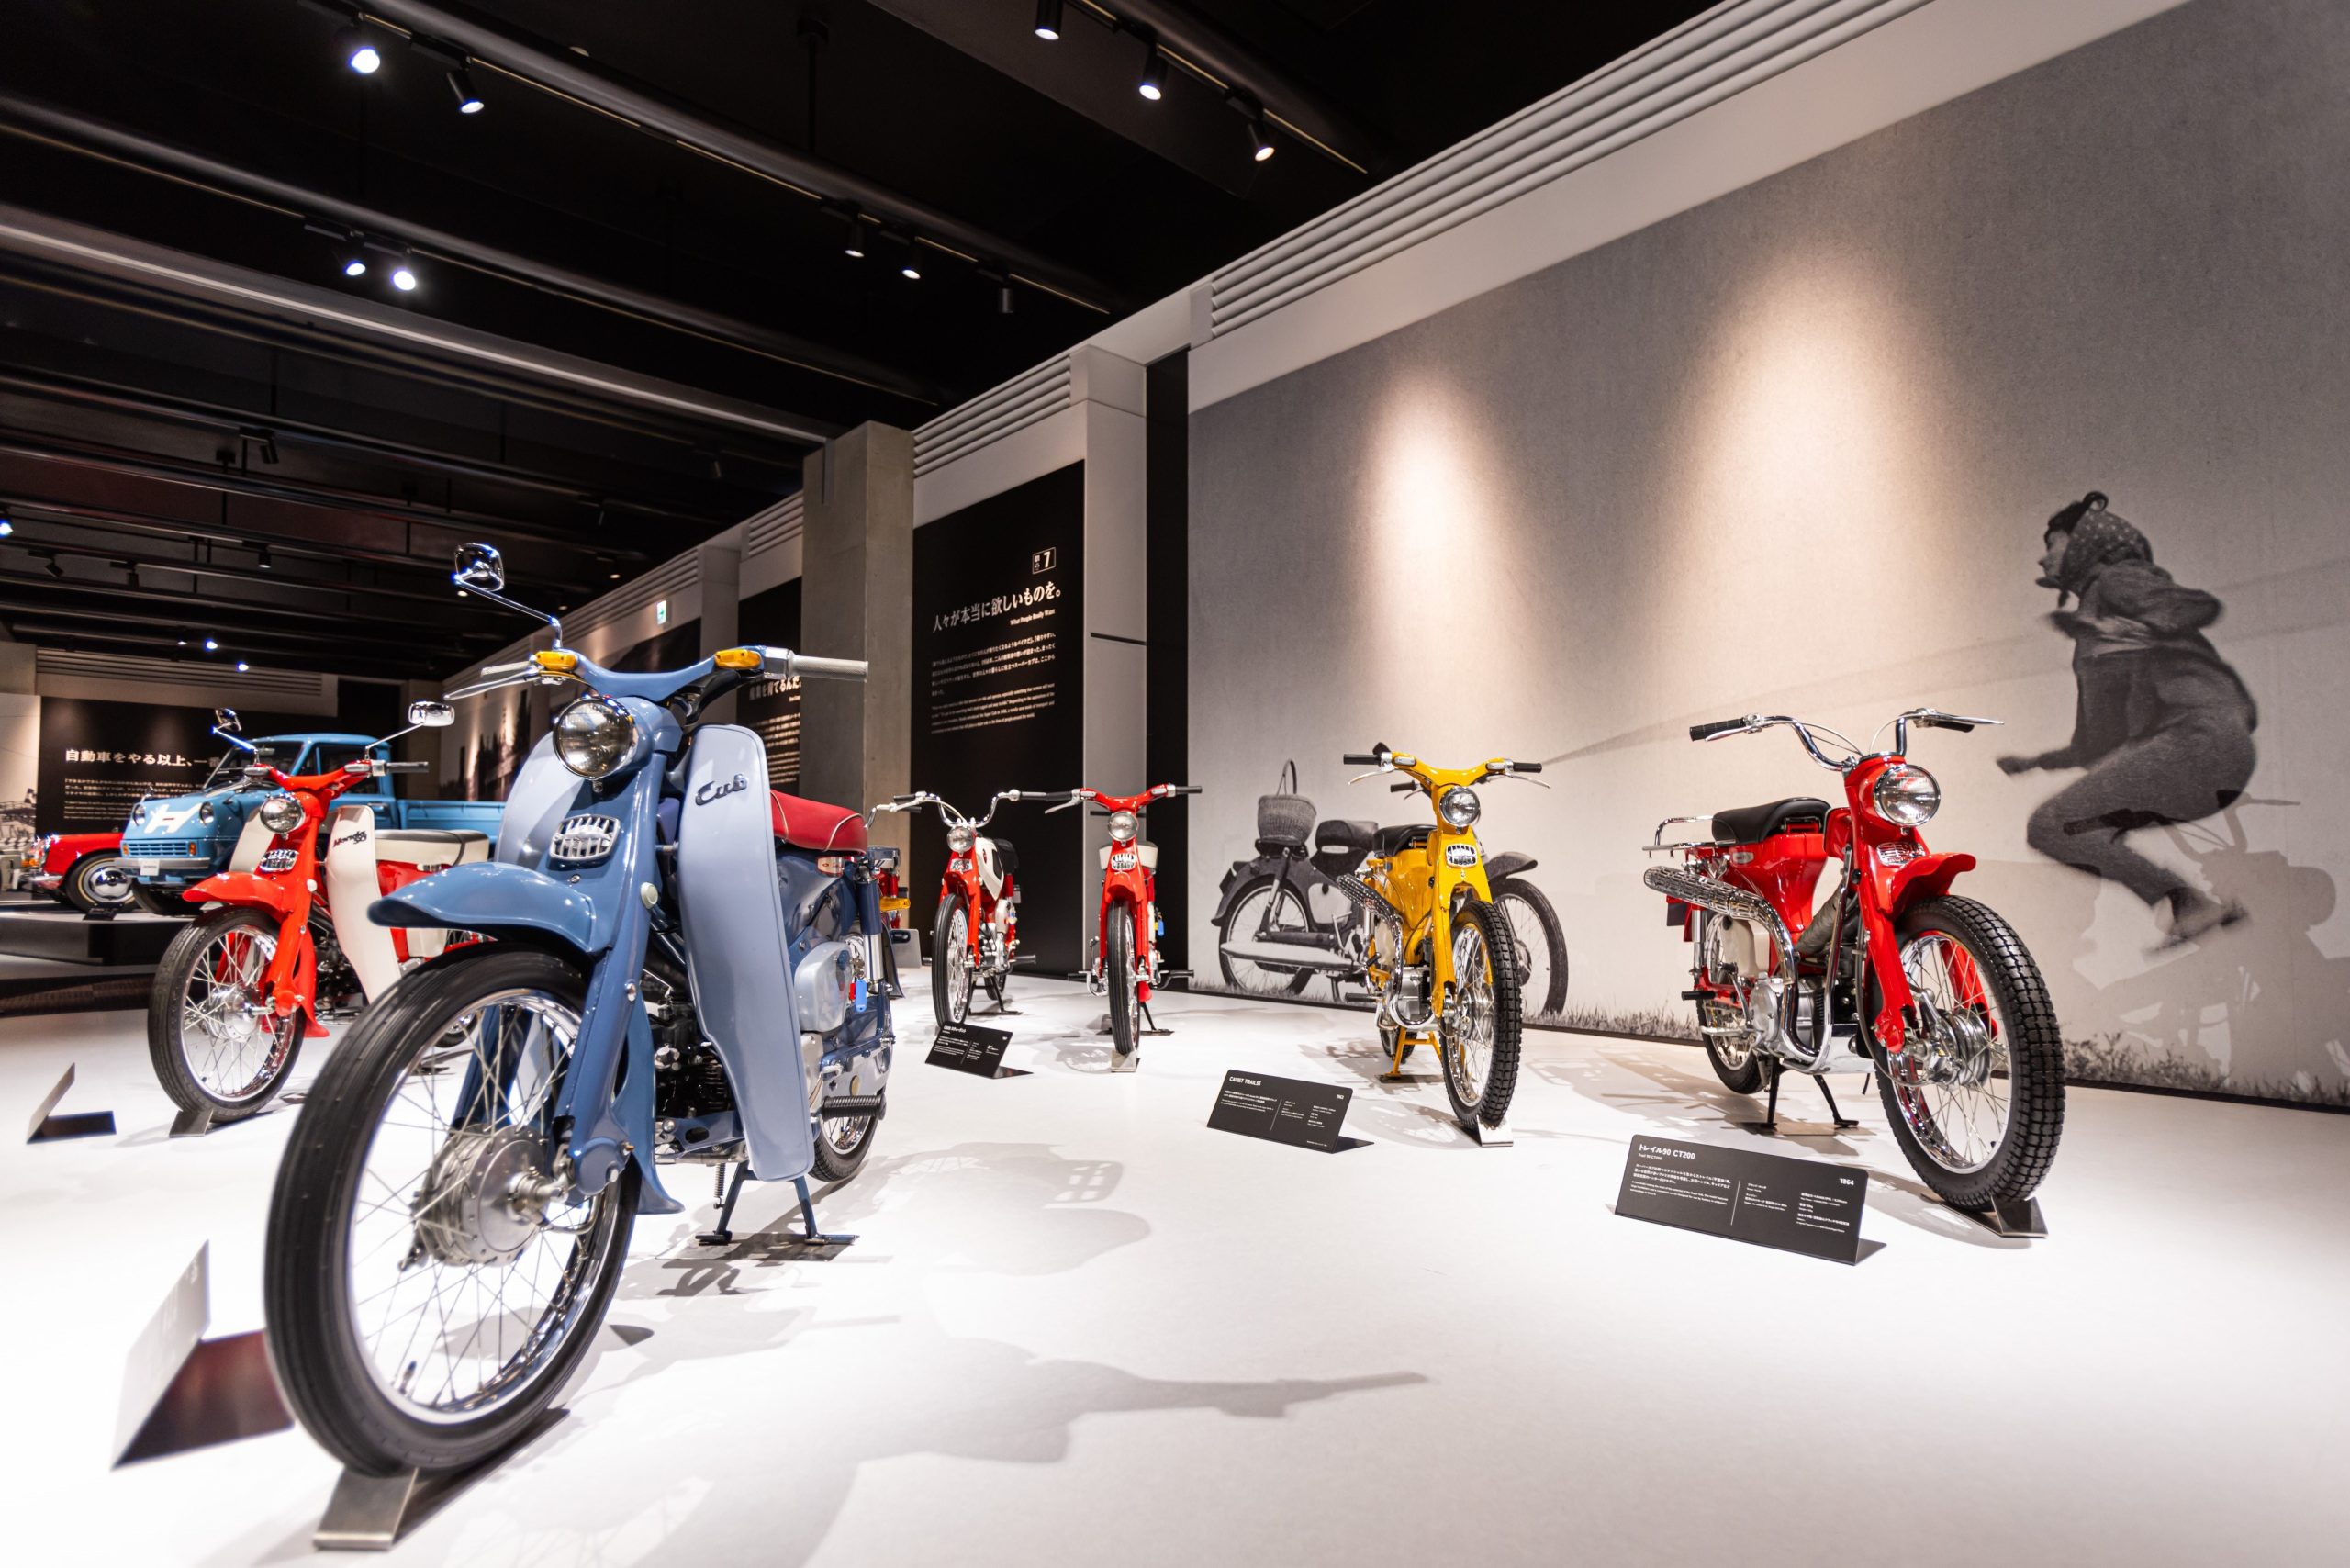 Honda Reopened Its Museum in Japan, and It Looks Stunning